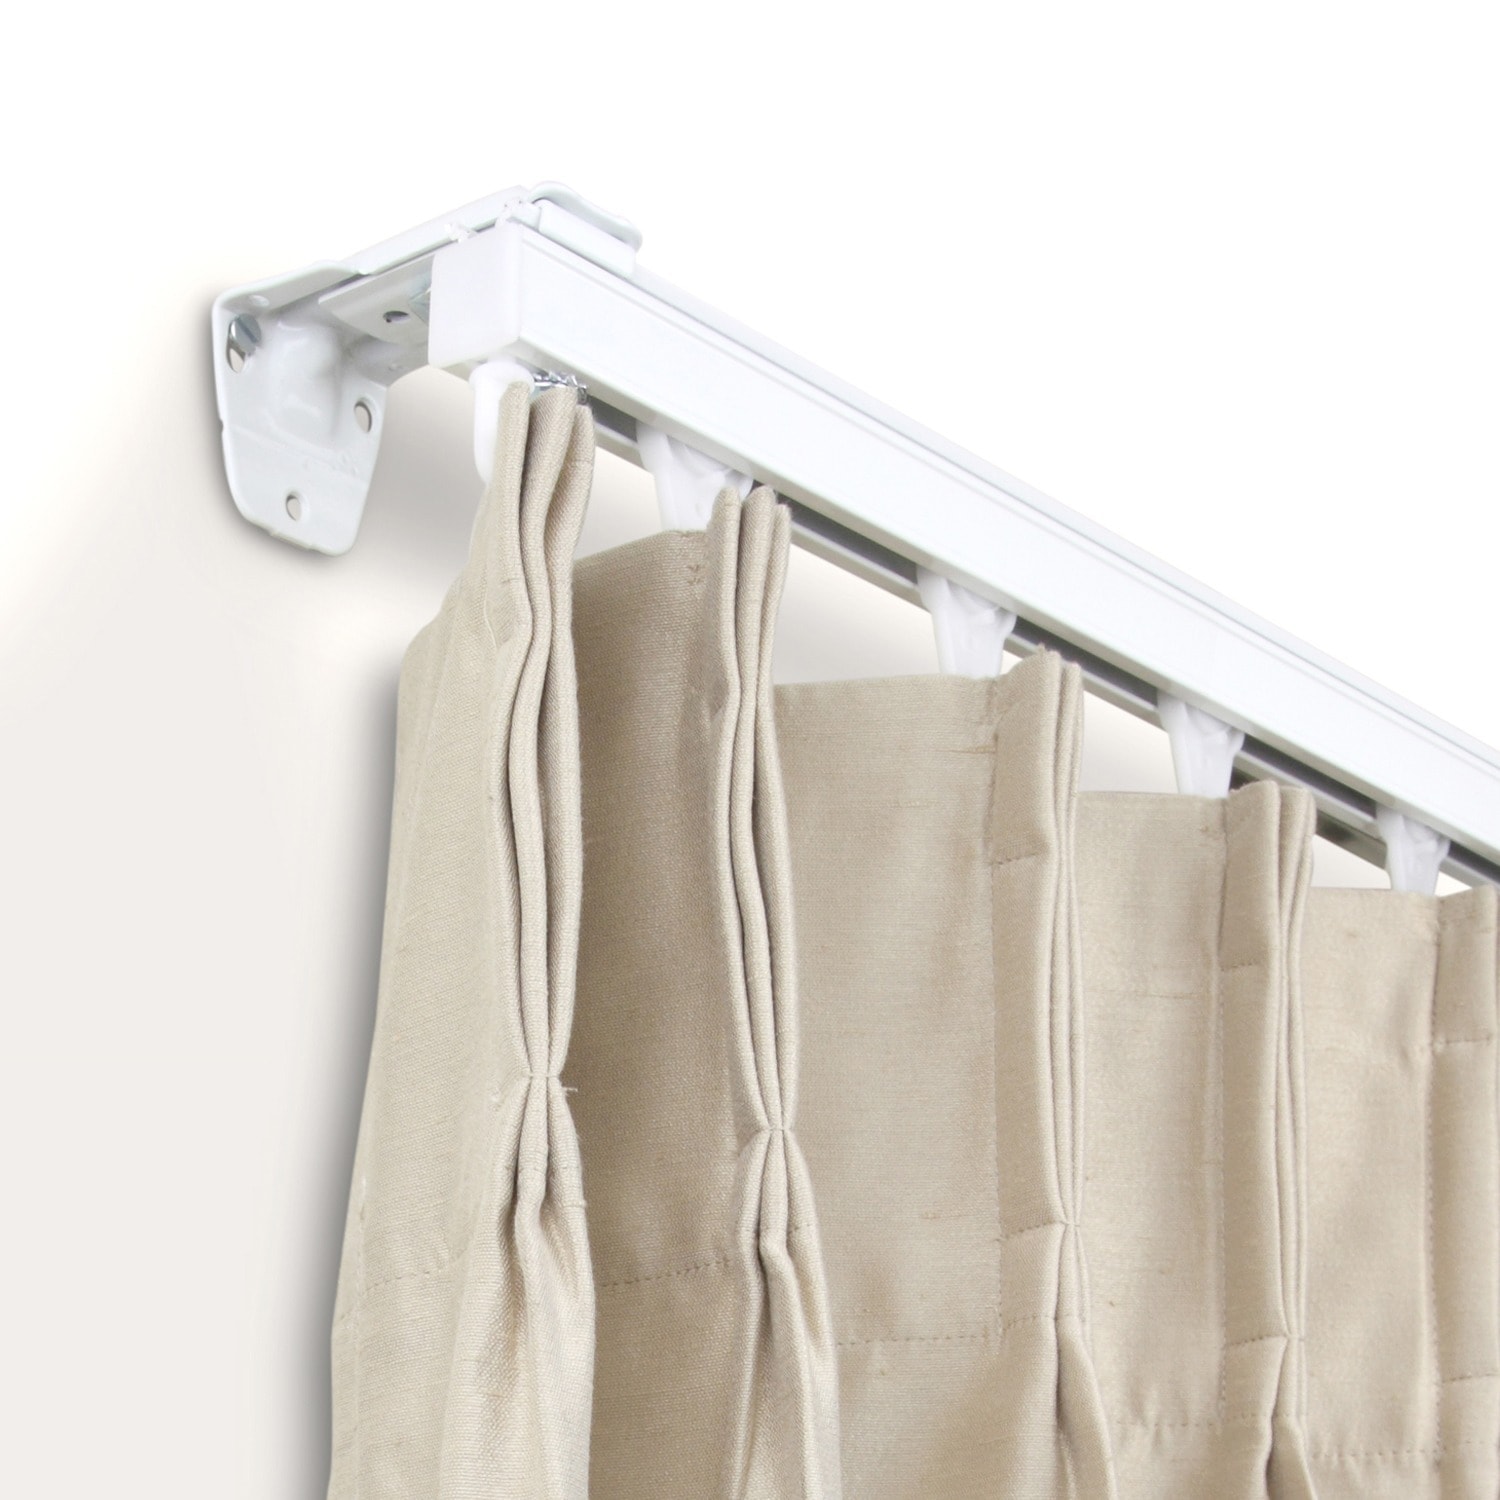 Shop Instyledesign Heavy Duty White Wall Or Ceiling Curtain Track